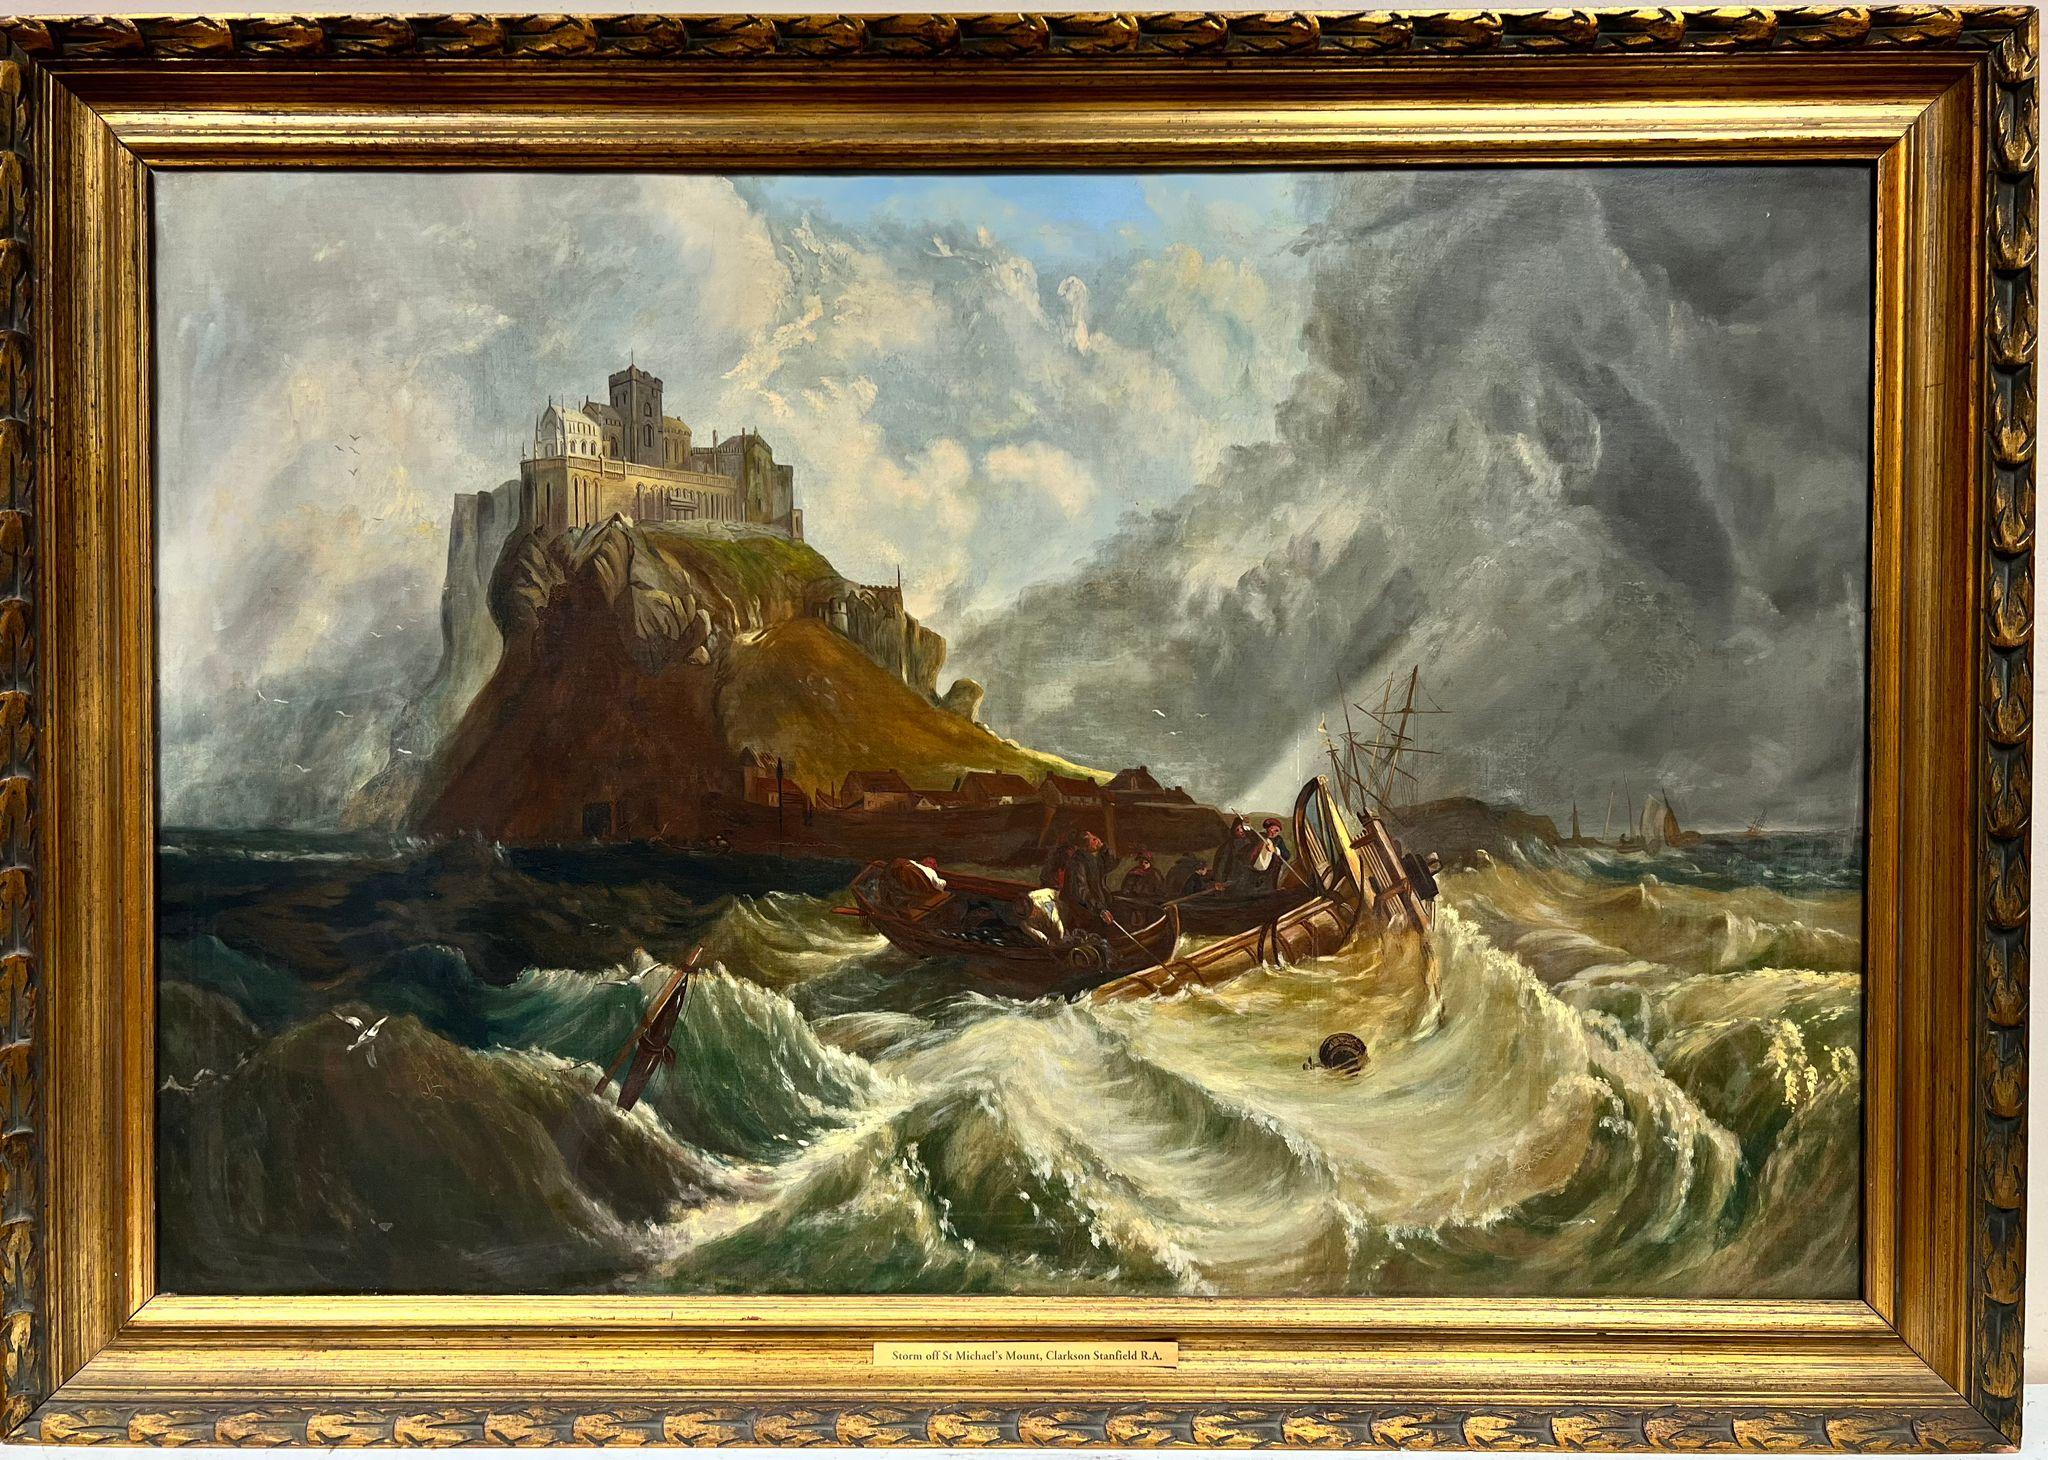 Clarkson Stanfield Landscape Painting - Huge Victorian English Marine Oil Painting Stormy Seas St Michaels Mount